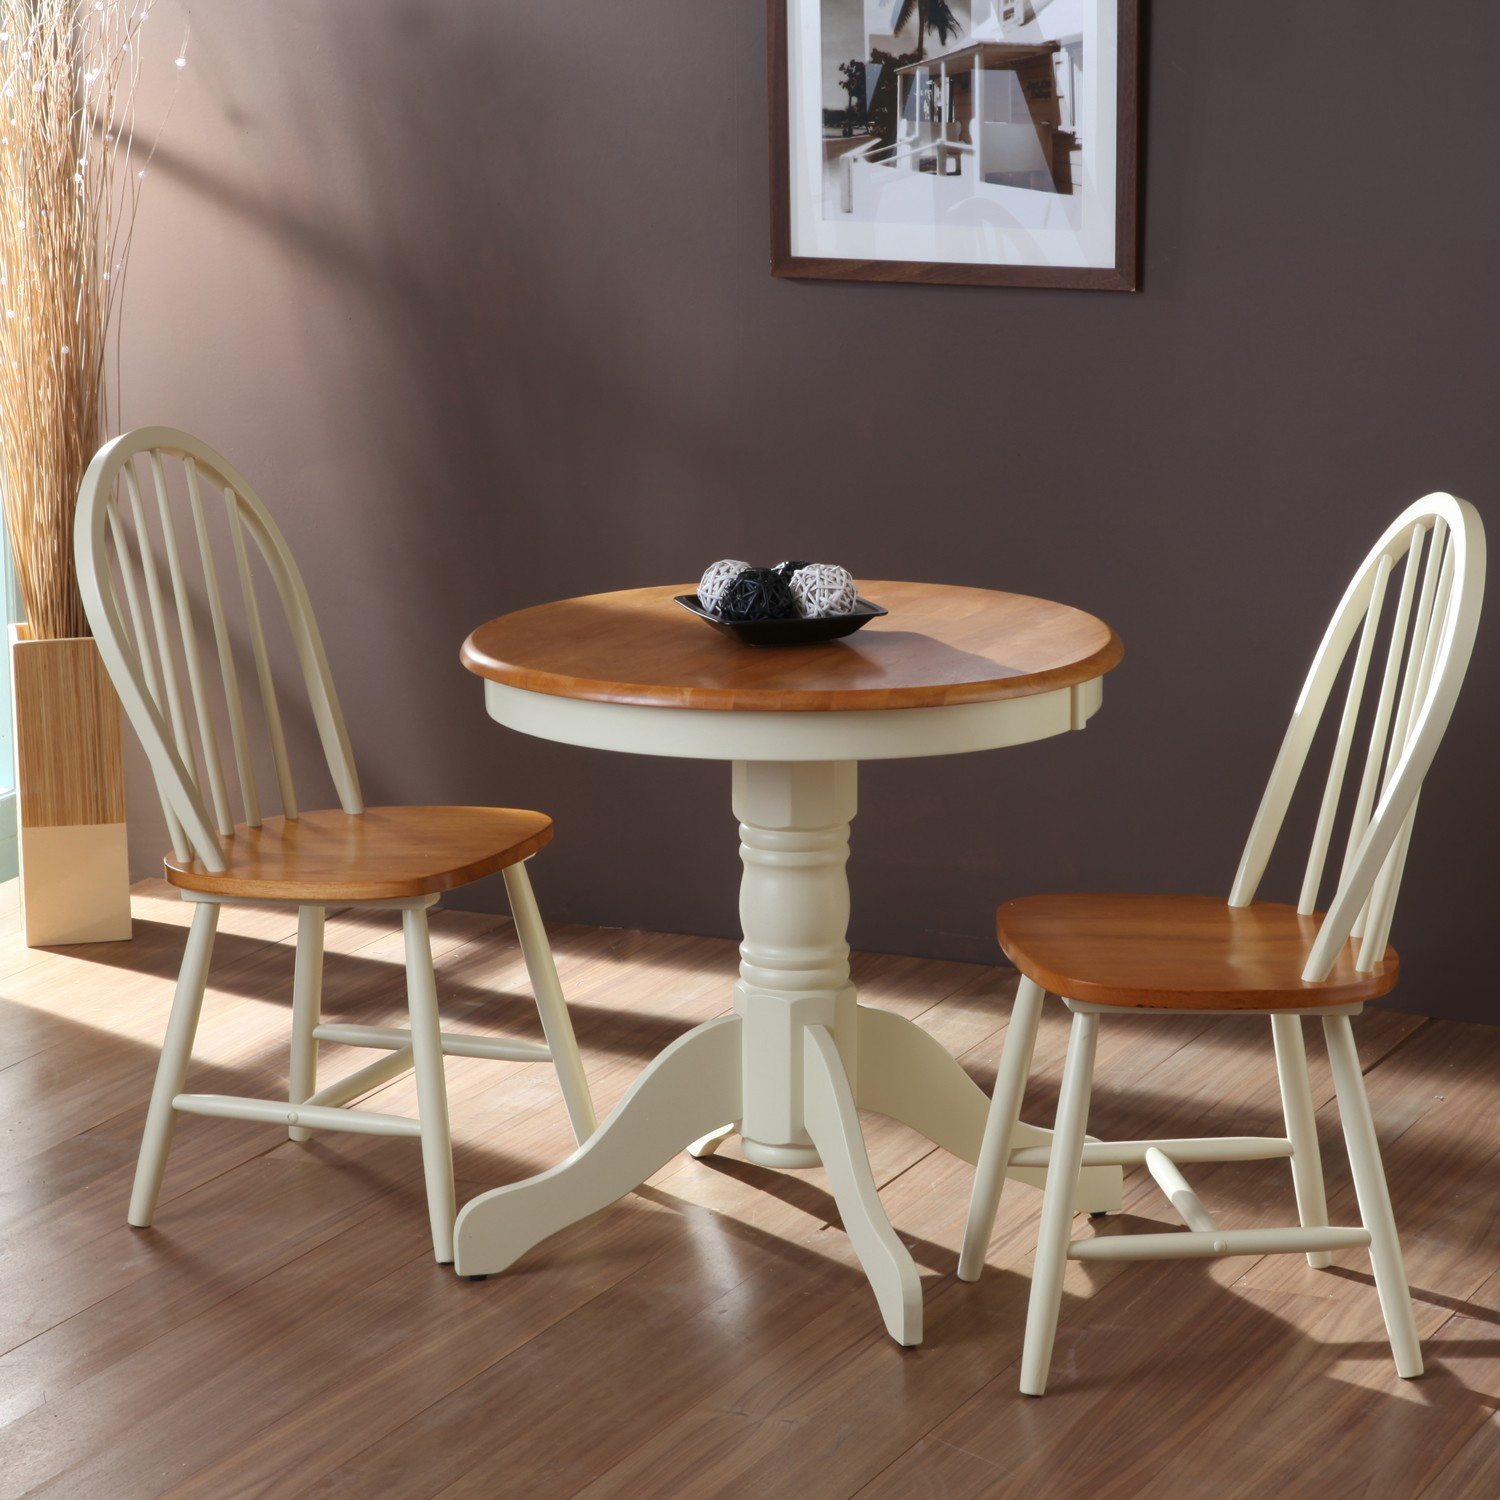 Small Round Kitchen Table Sets
 Beautiful White Round Kitchen Table and Chairs – HomesFeed